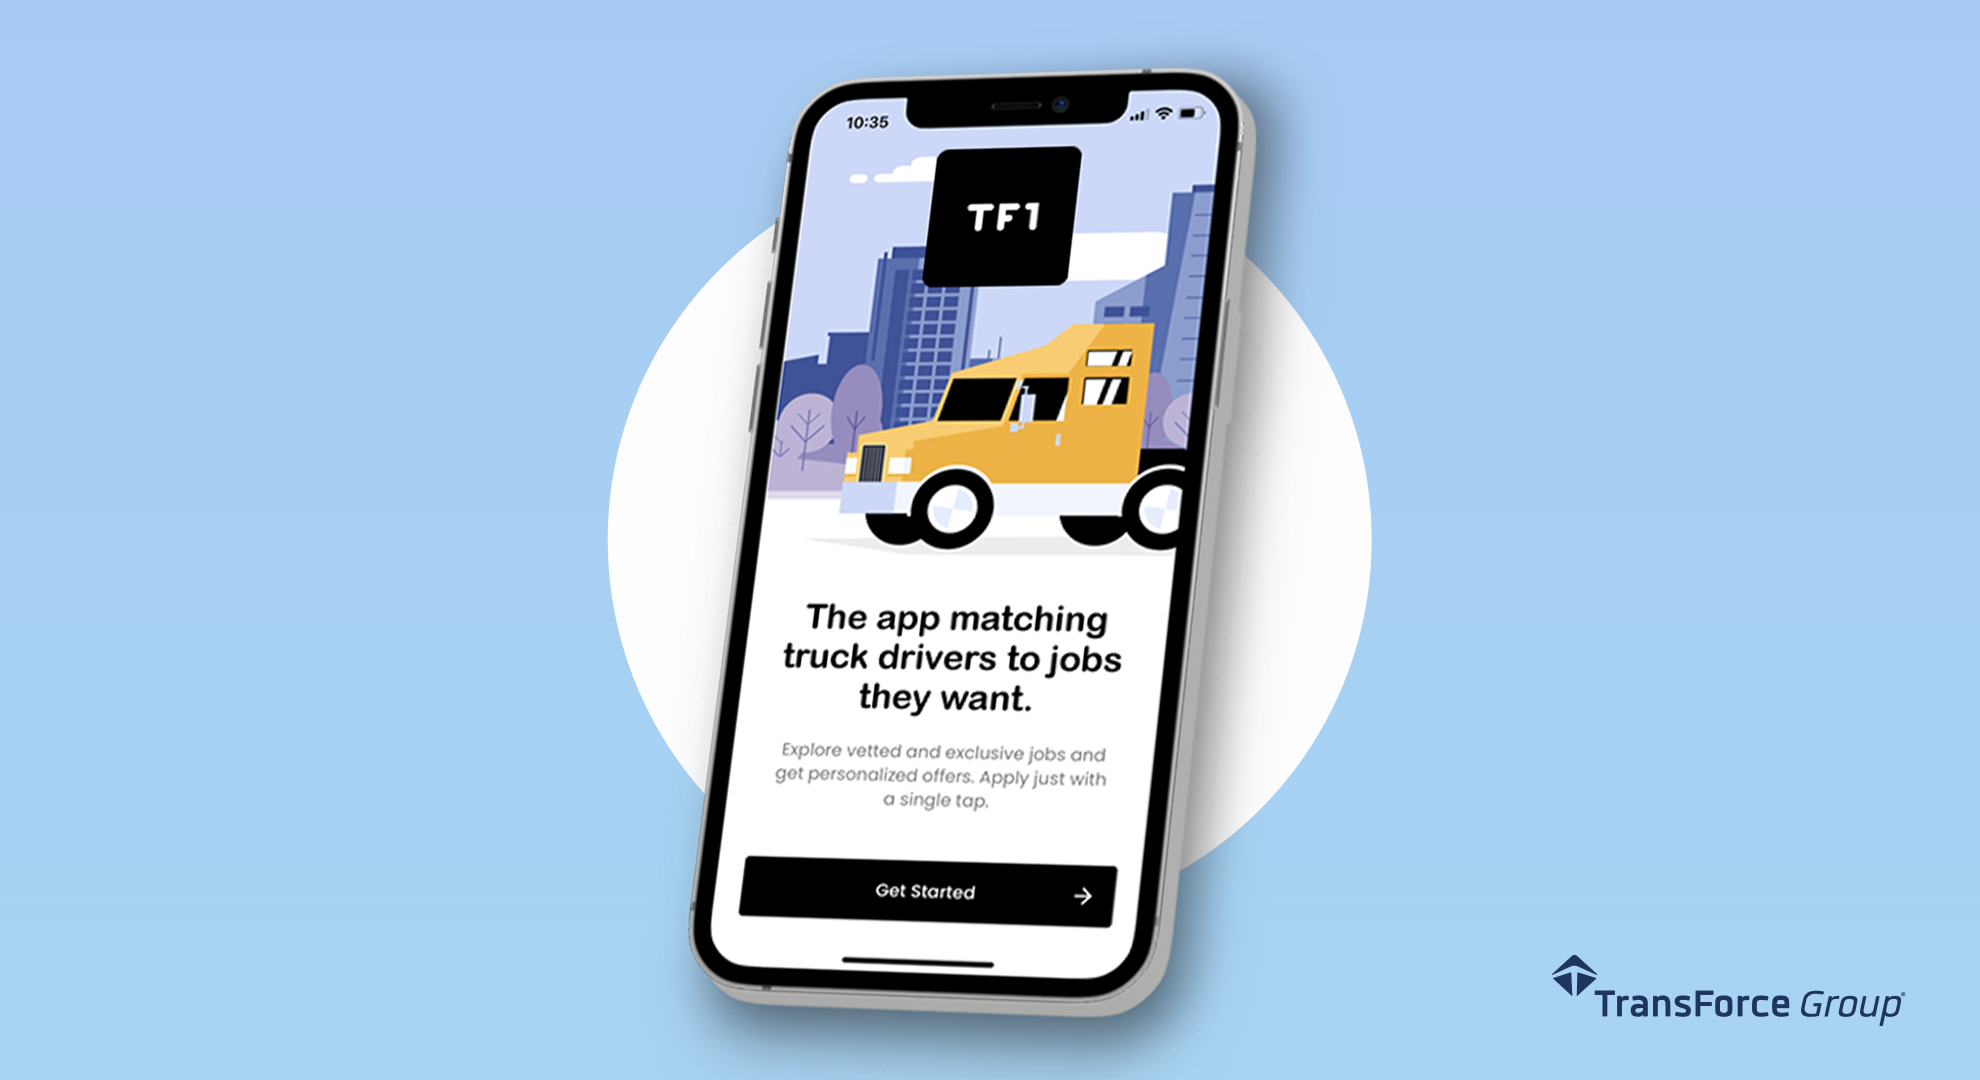 TransForce Gets Drivers in Trucks Faster with new TF1 App